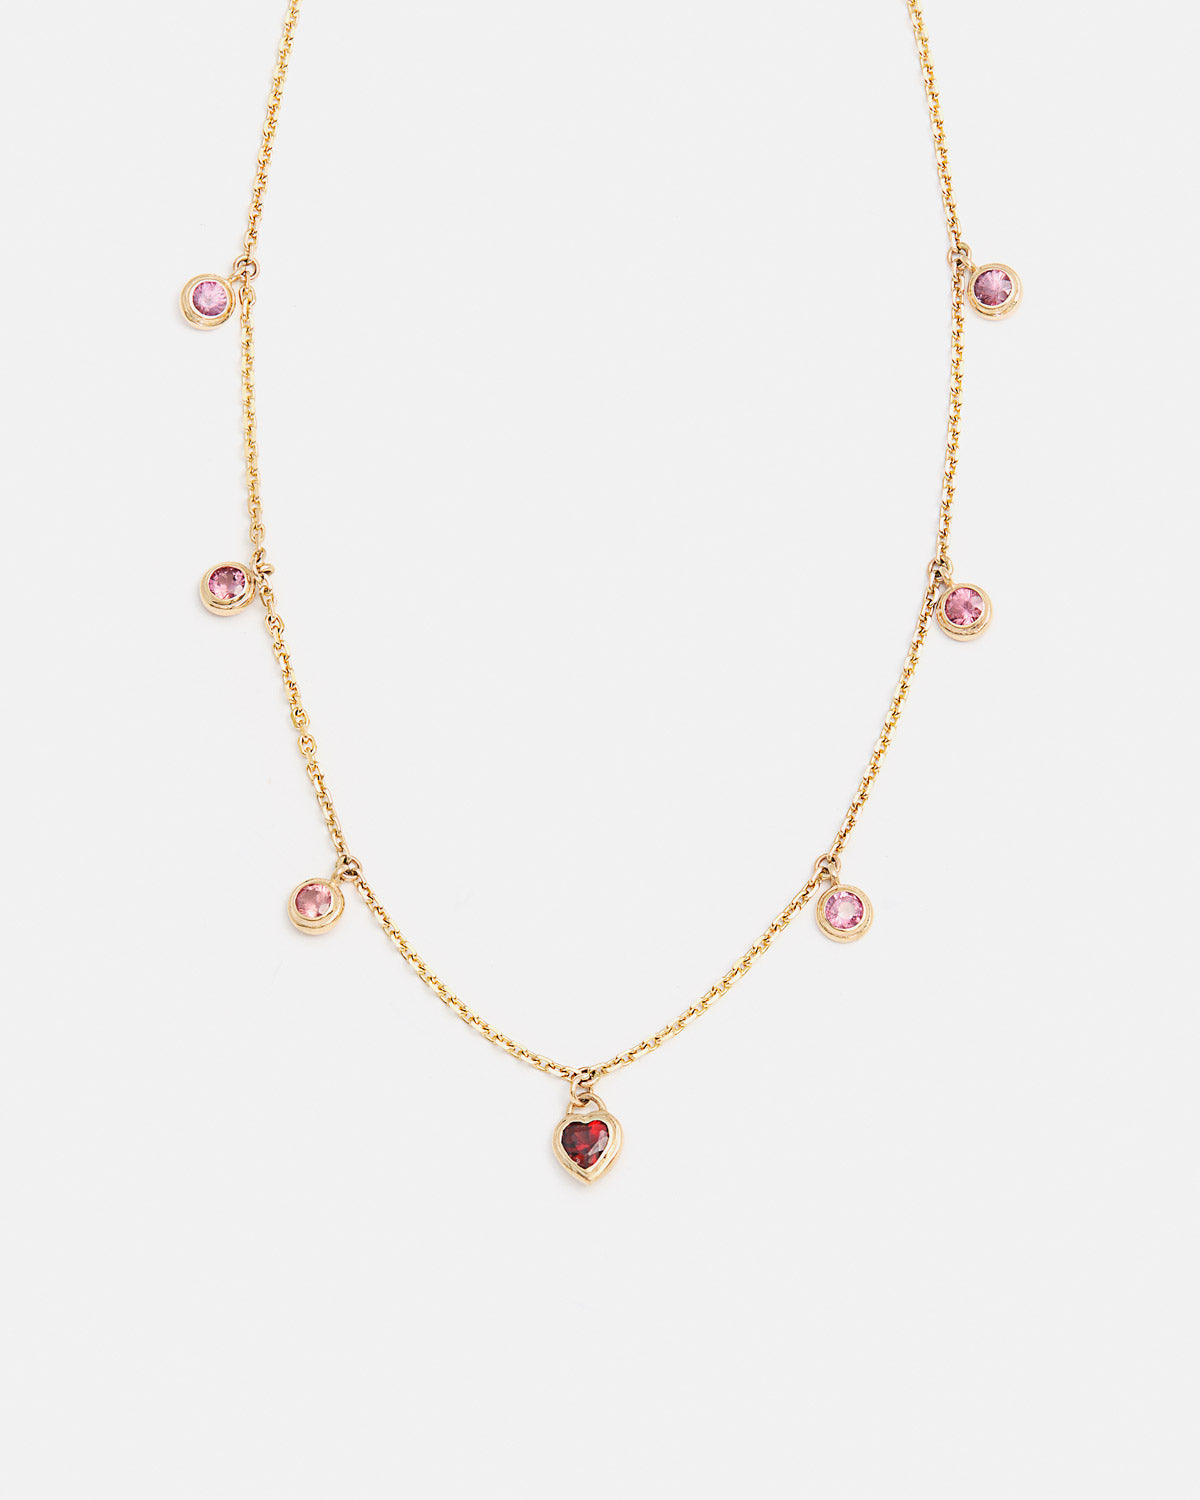 Destiny Necklace in 14k Gold with Garnet and Rubies